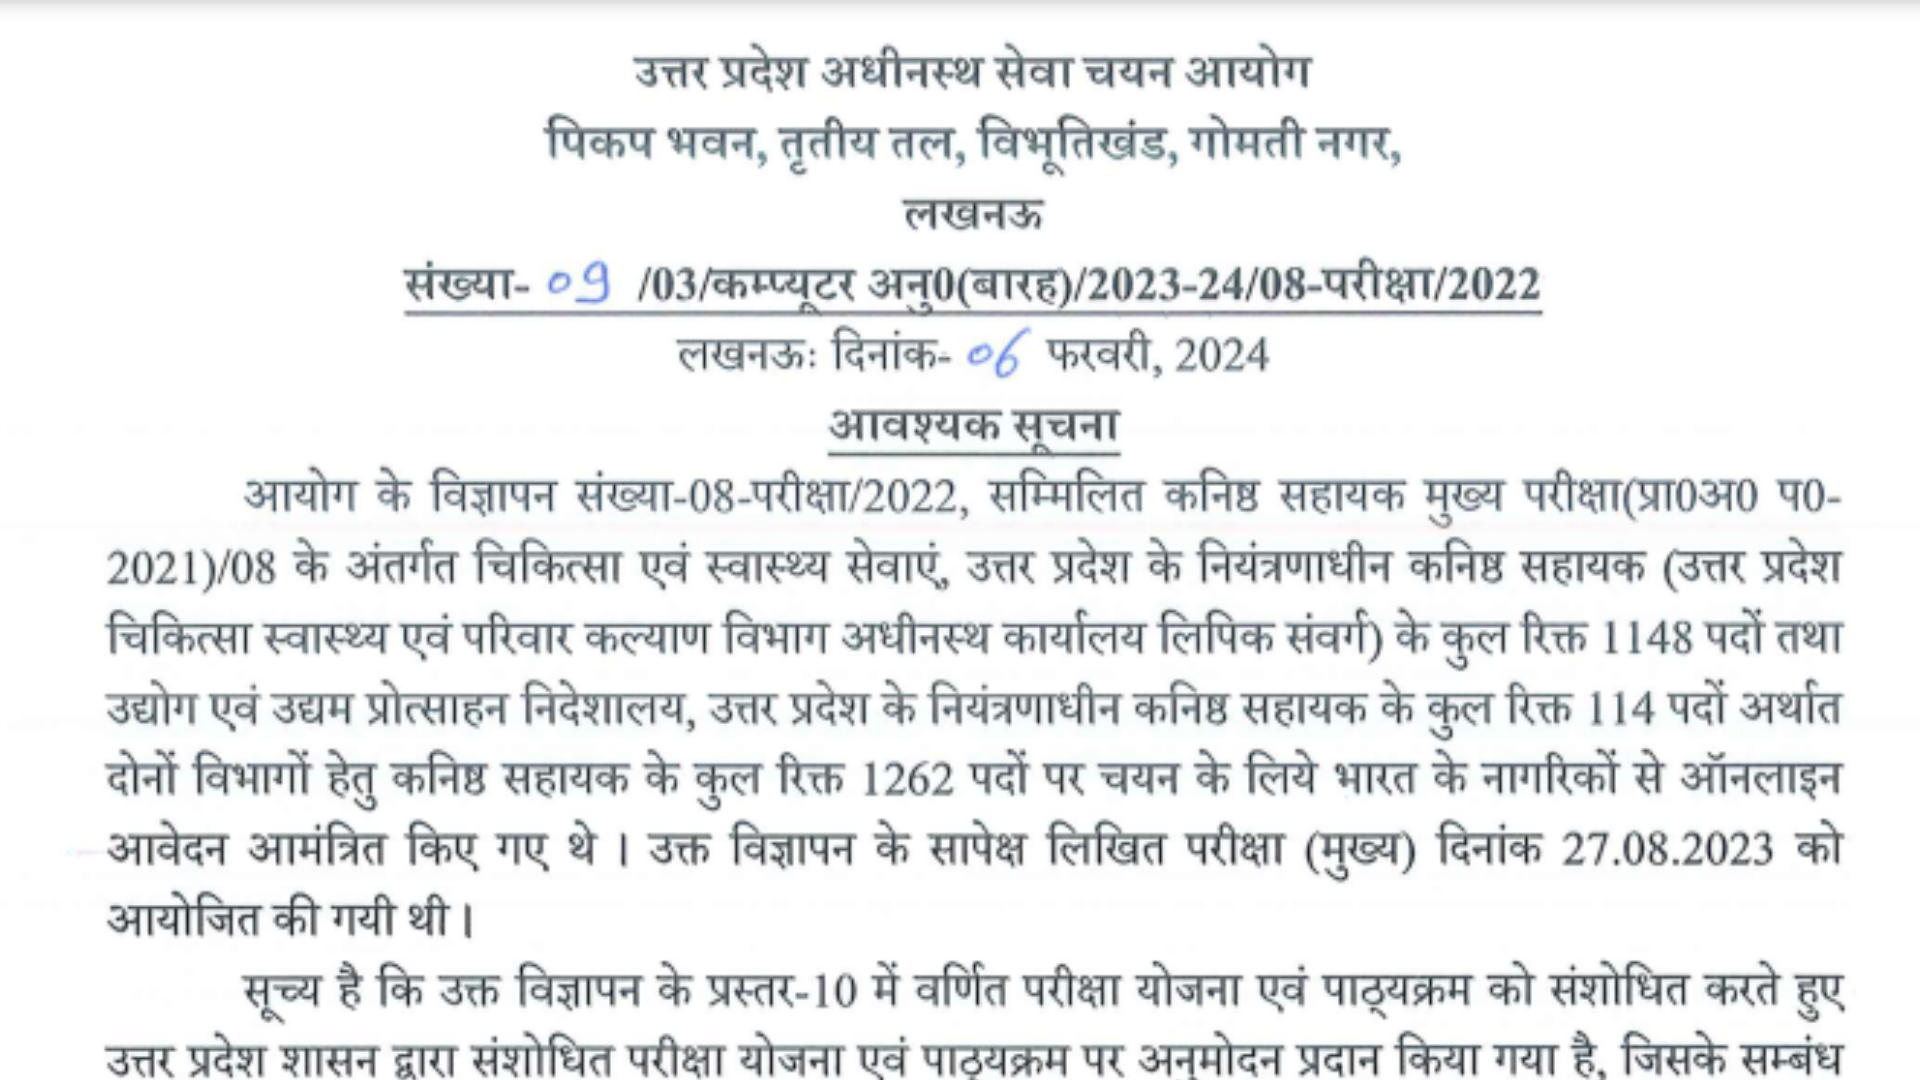 UPSSSC 10+2 Junior Assistant Recruitment 2022 Mains Exam Results, Supplementary Result 2024 for 1262 Post